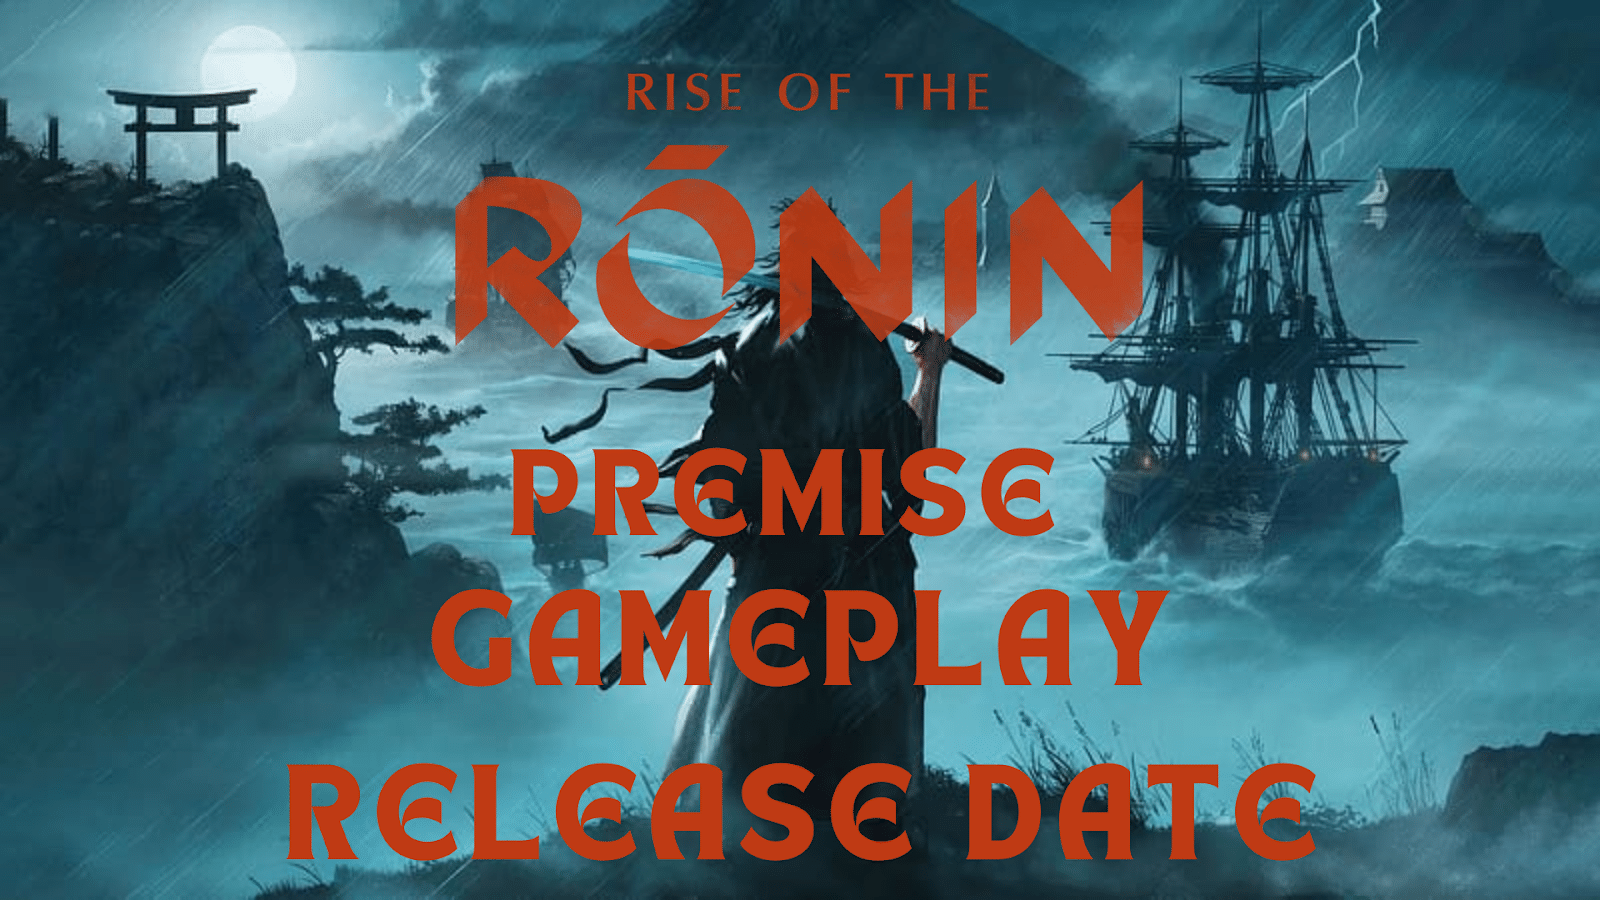 Everything We Know About Rise of the Ronin So Far